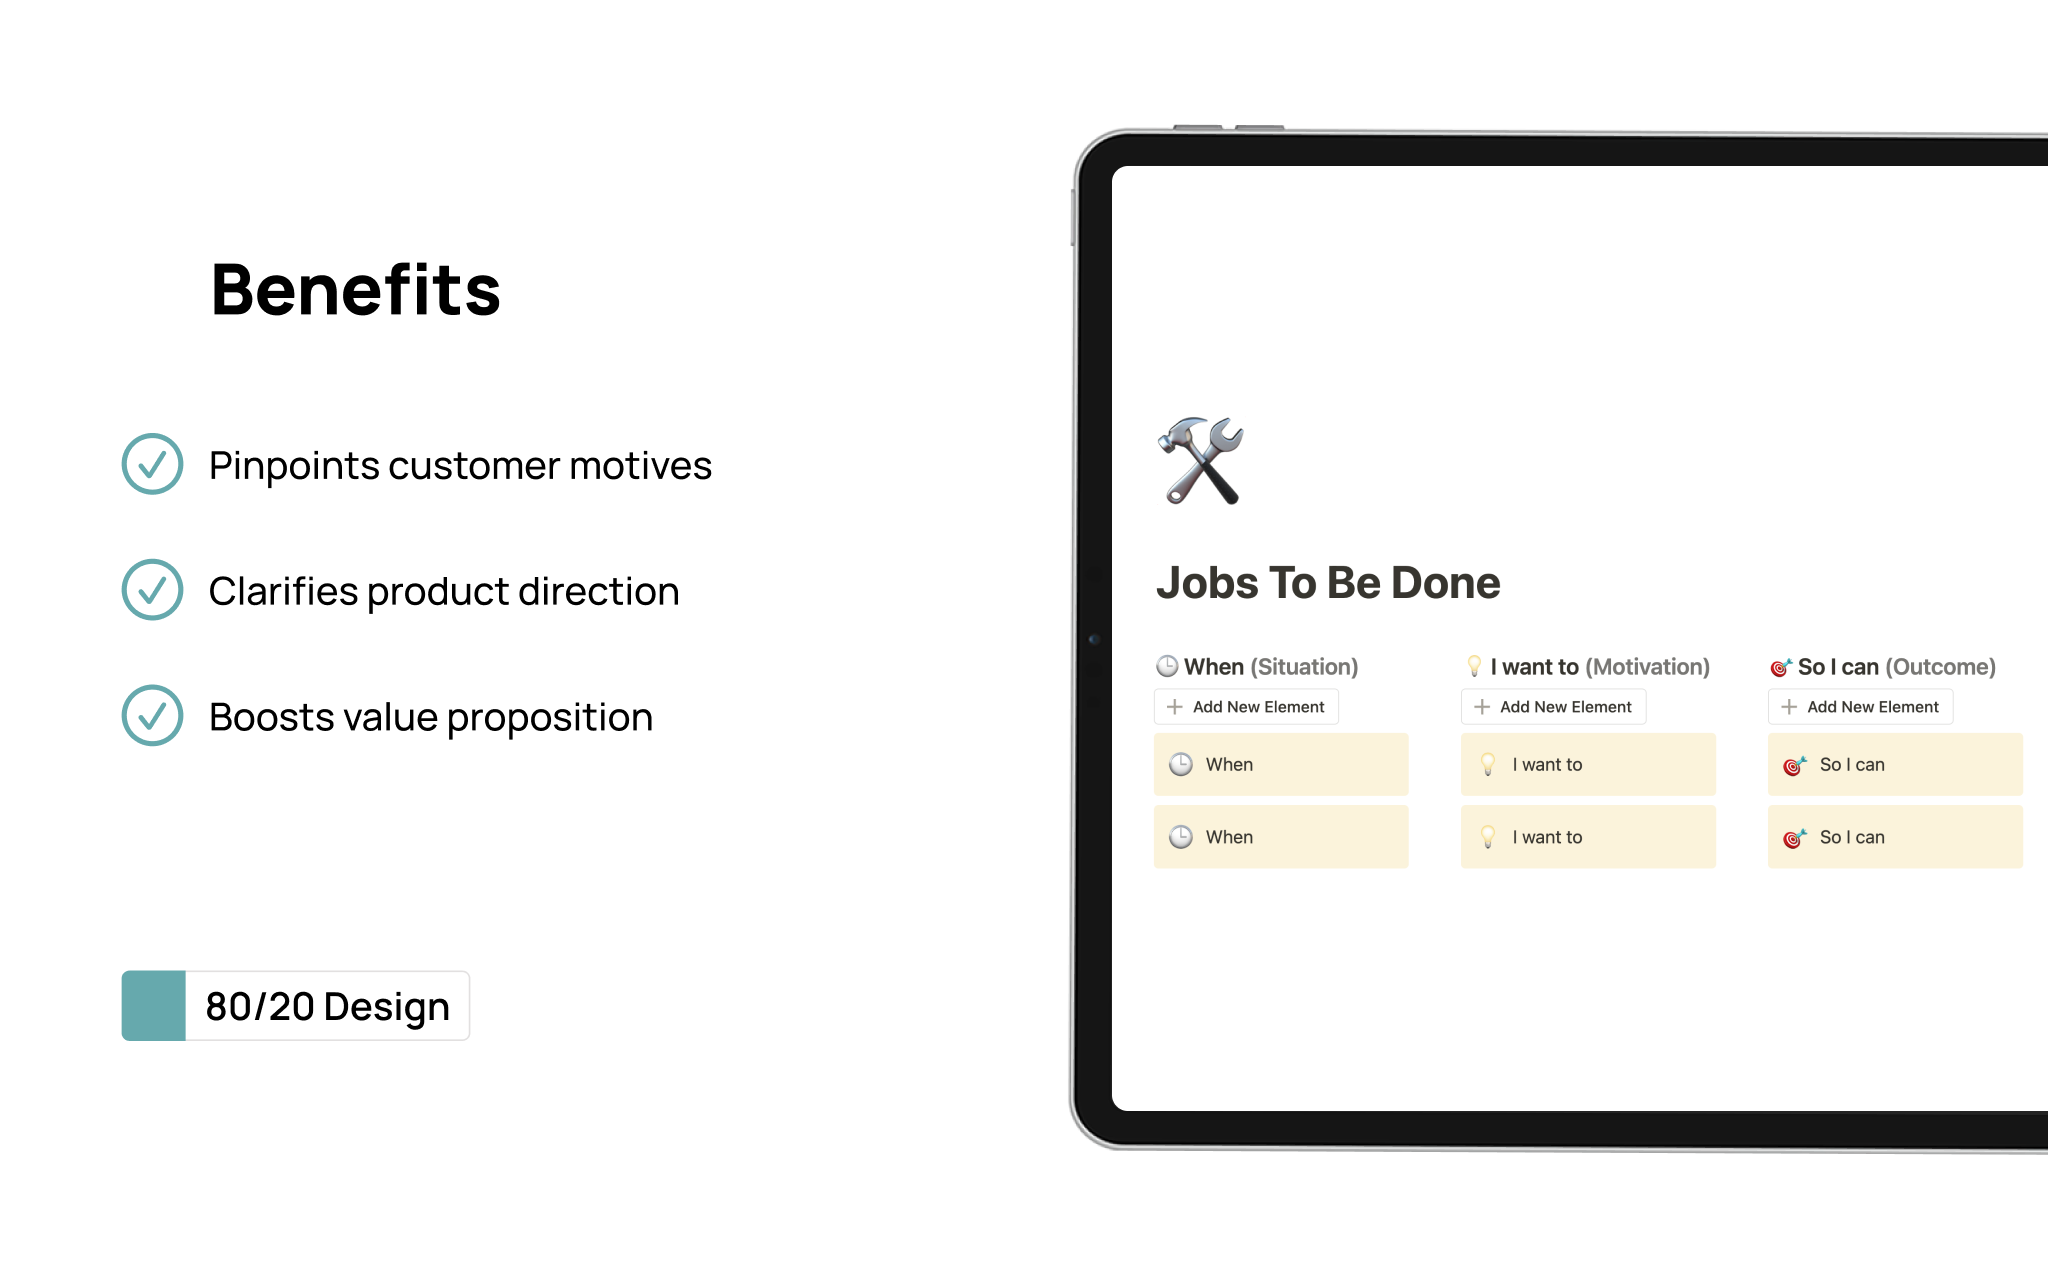 Refine your product strategy with "🔍 Jobs To Be Done" by 80/20 Design. Uncover core customer needs for precise value creation. Part of our 'Product Manual' series, it's a must-have for startups. Visit www.8020d.com for more resources 🌟.